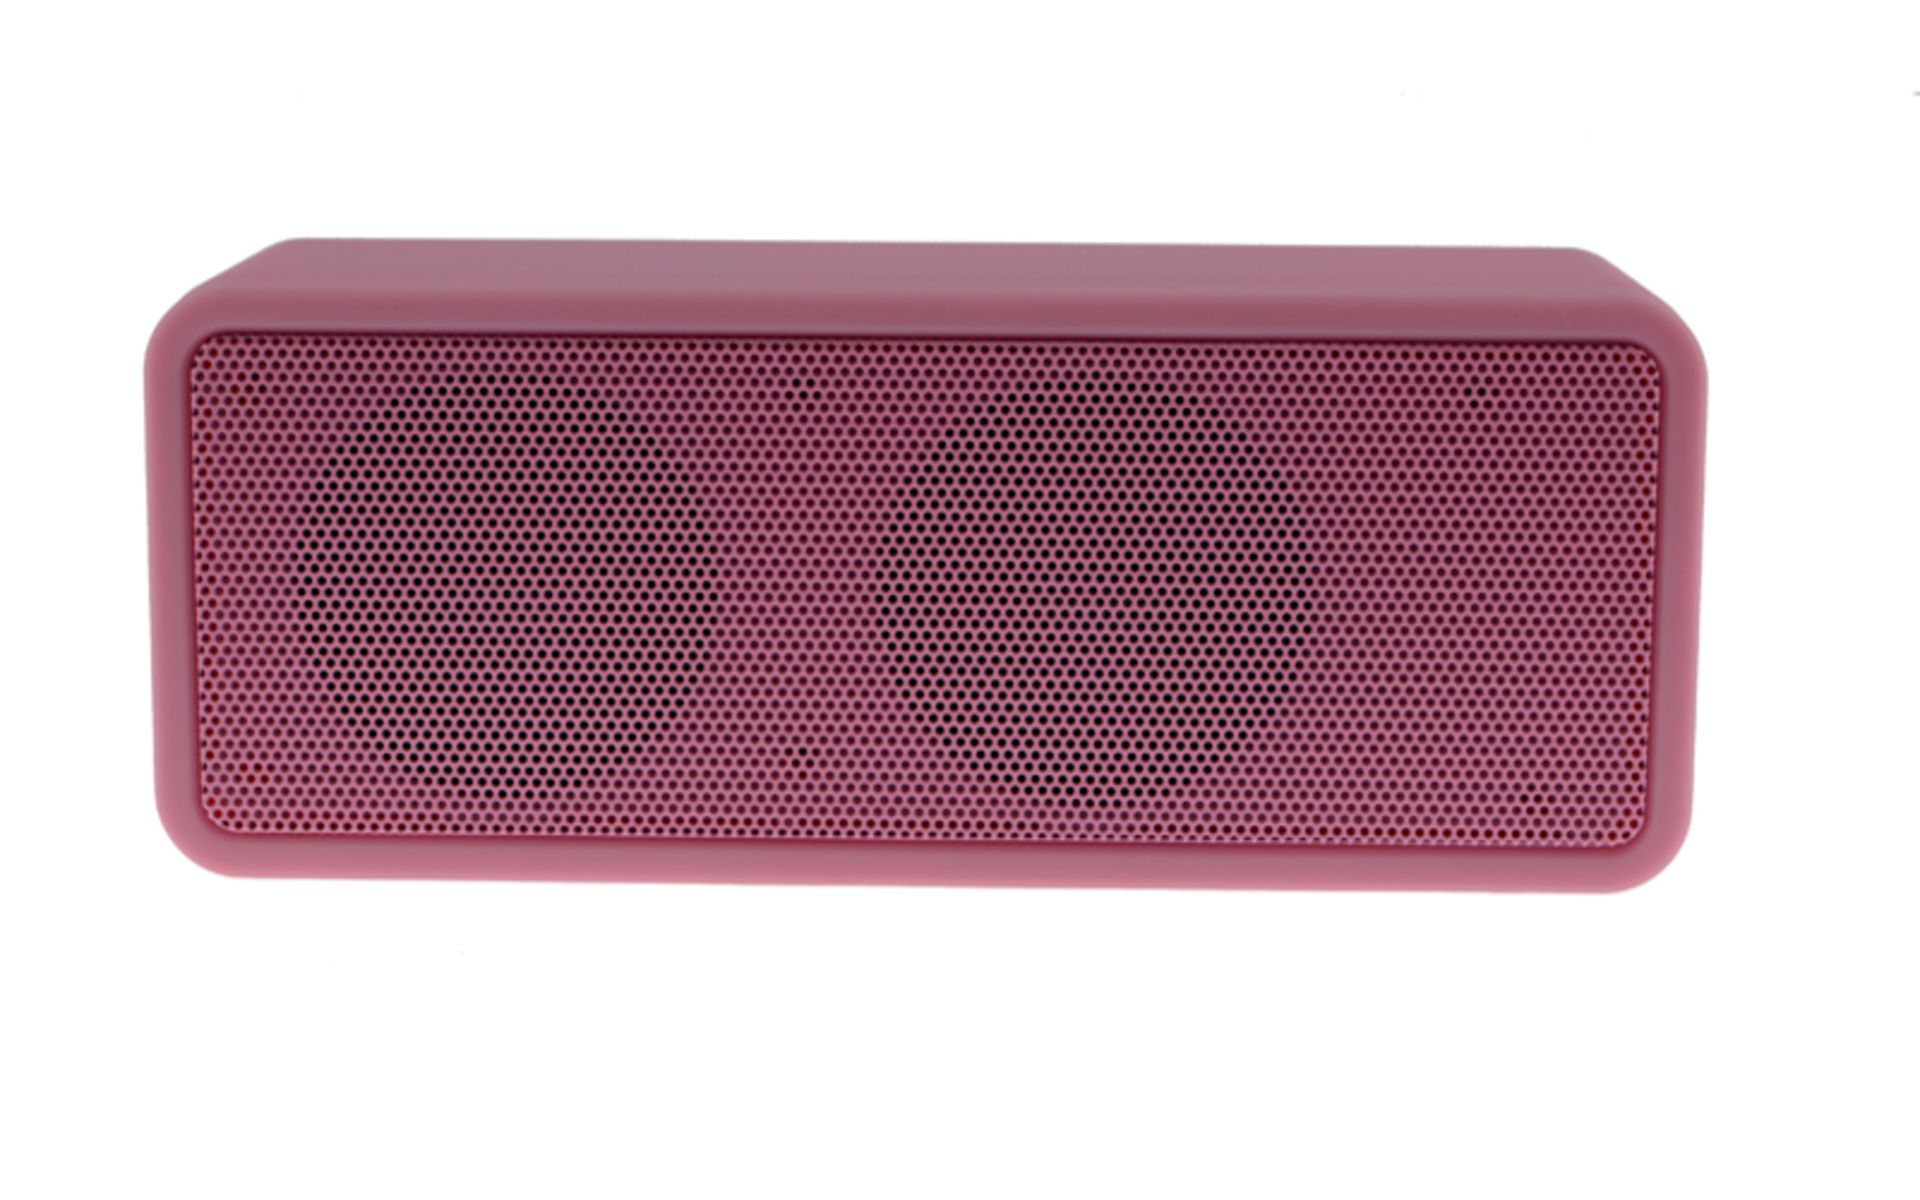 V *TRADE QTY* Brand New Eon-Earz Wireless Bluetooth Speaker With Super Hi-Fi Audio Compatible with